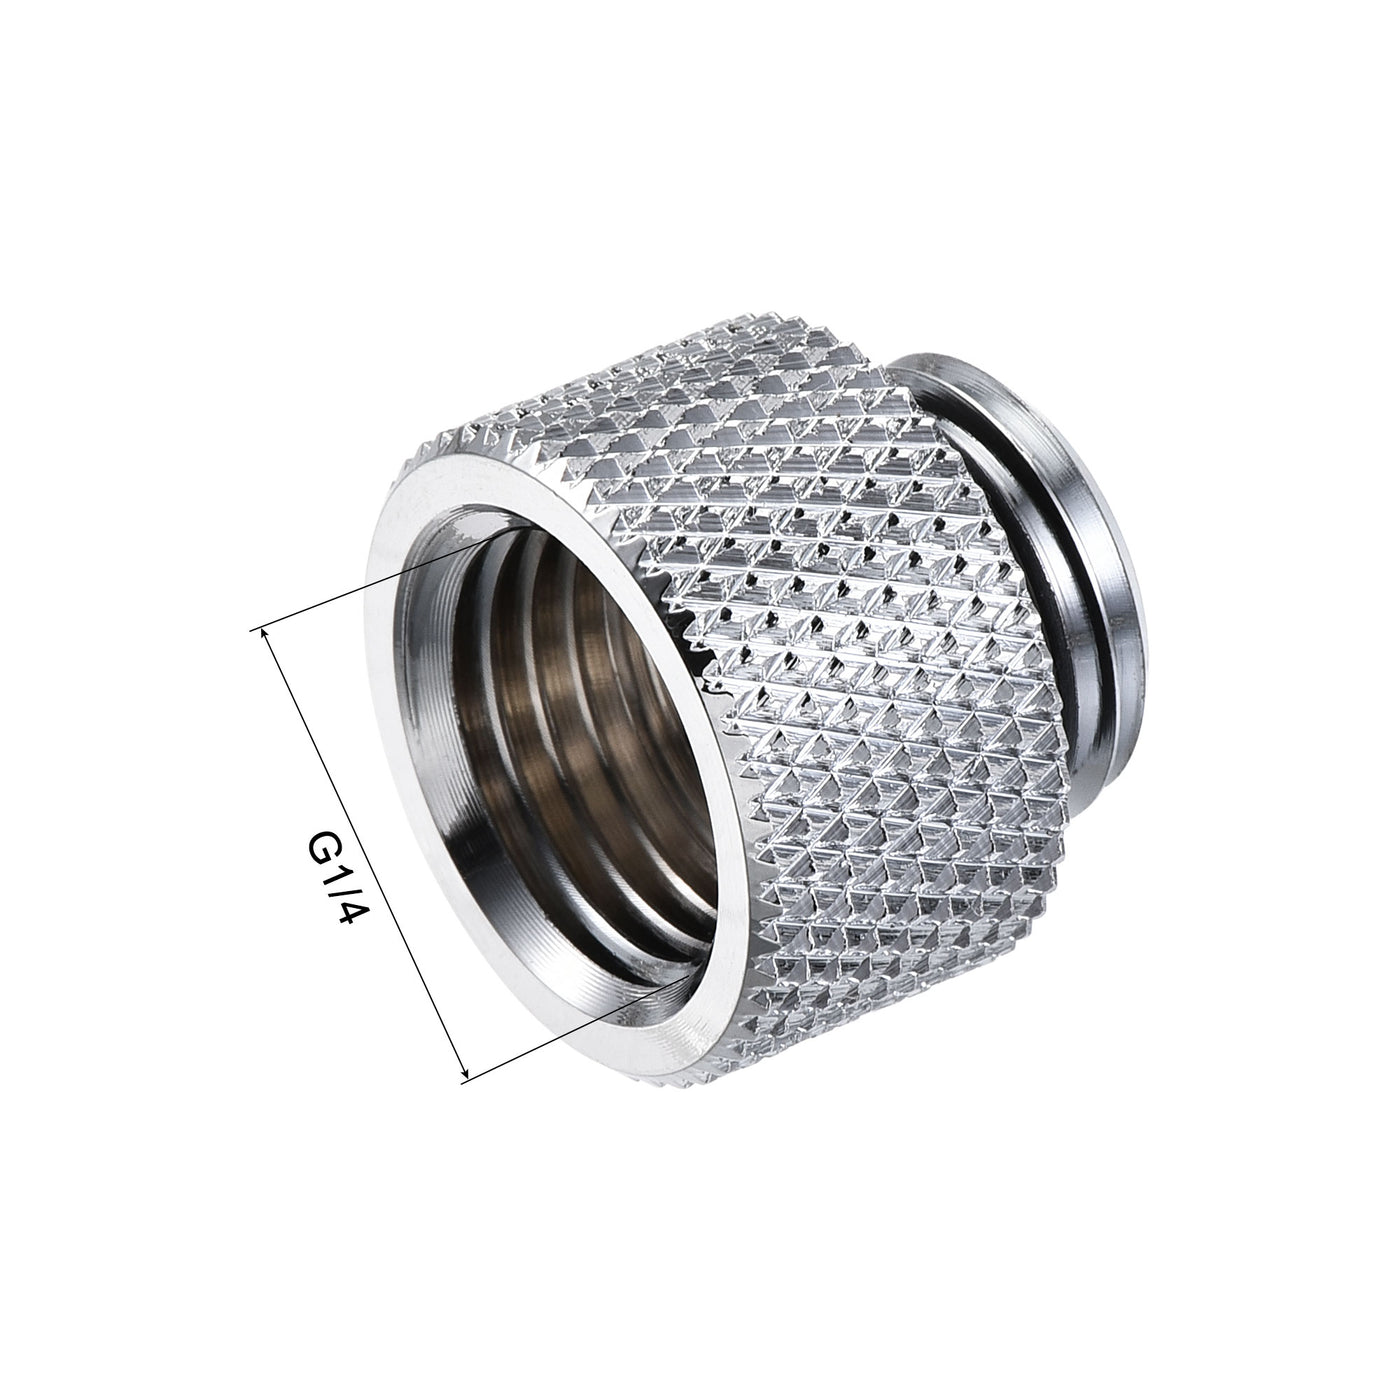 uxcell Uxcell Male to Female Extender Fitting G1/4 x 10mm for Water Cooling System Silver